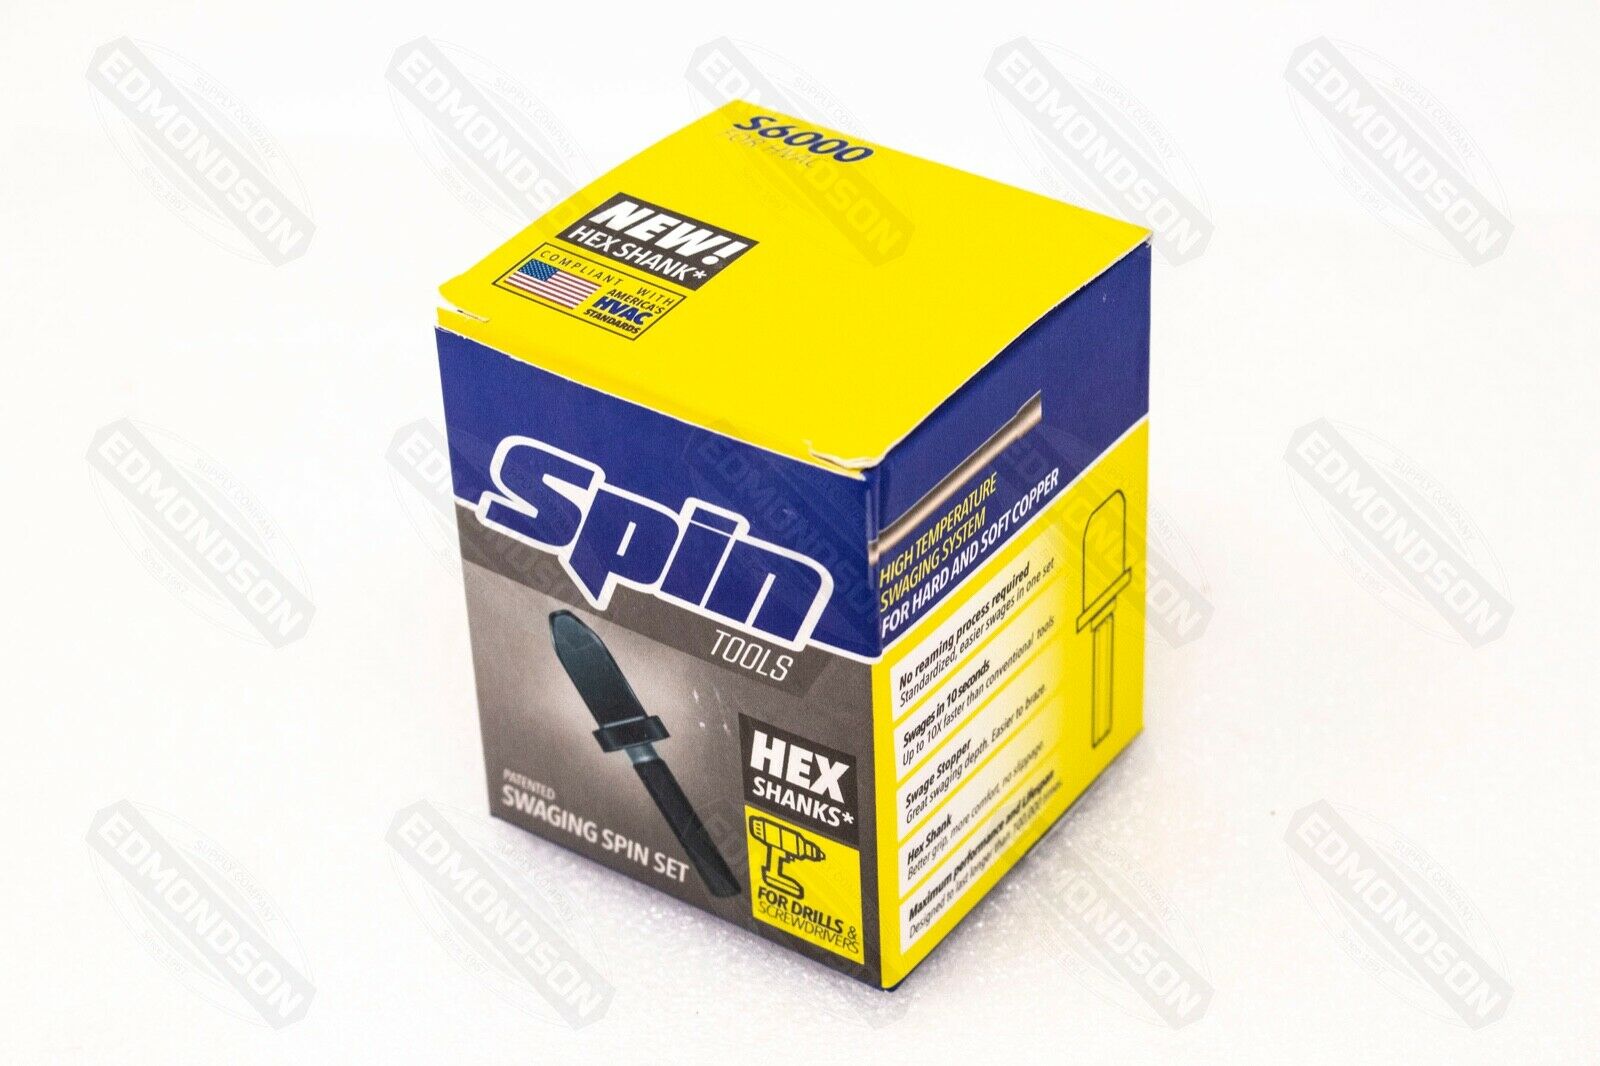 Spin Tools S6000 Swaging Drill Bit Set, 1/4", 3/8", 1/2", 5/8", 3/4" & 7/8"